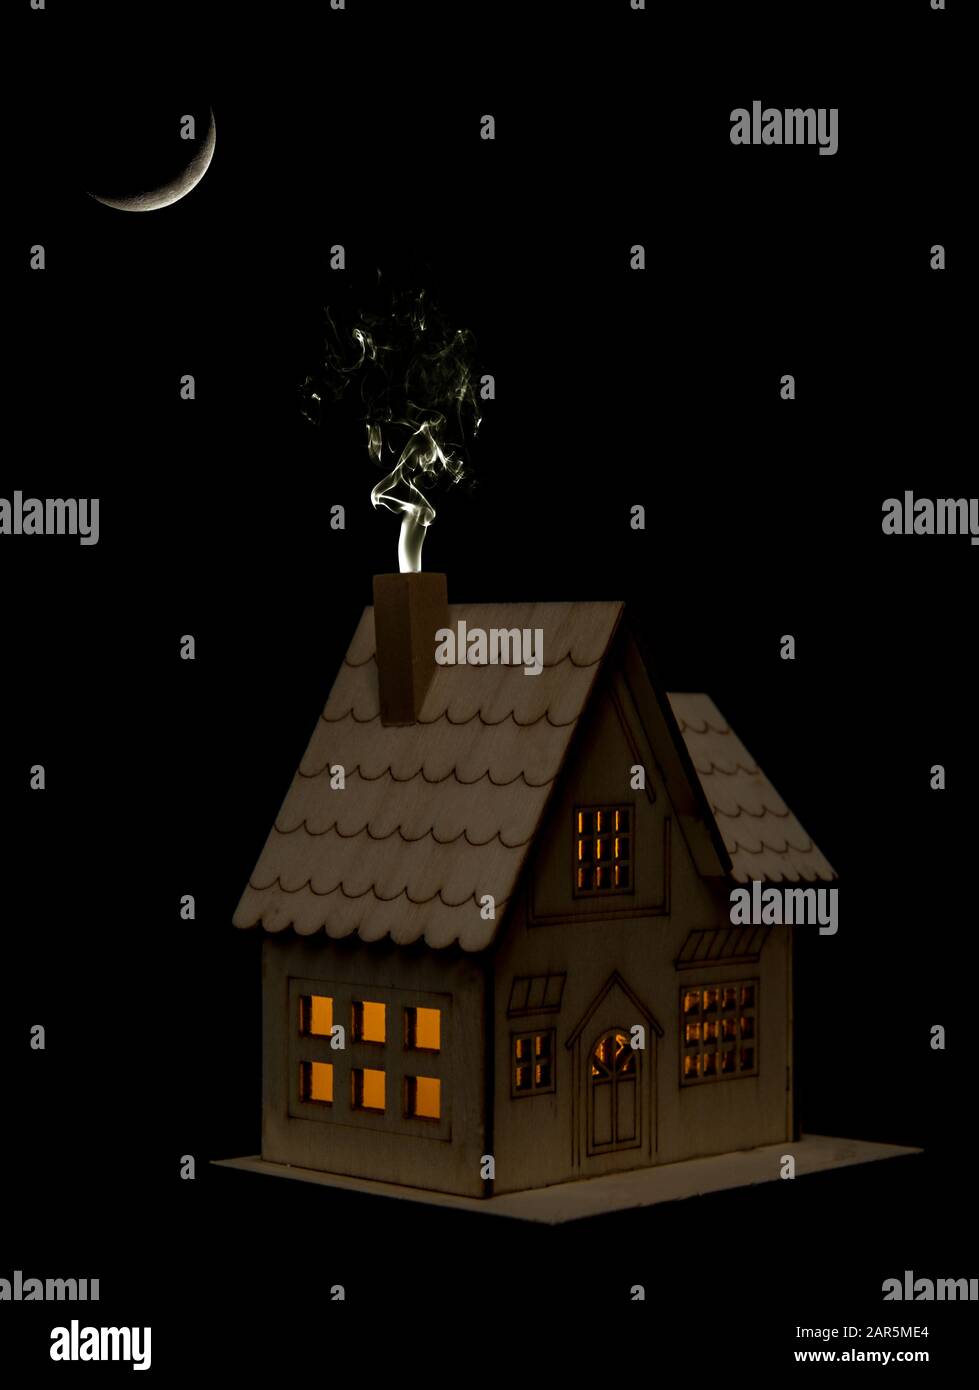 Toy house with lights on at night under a crescent moon, smoke from chimney. Leaving the lights on, waste of electricity, power, not eco friendly. Stock Photo